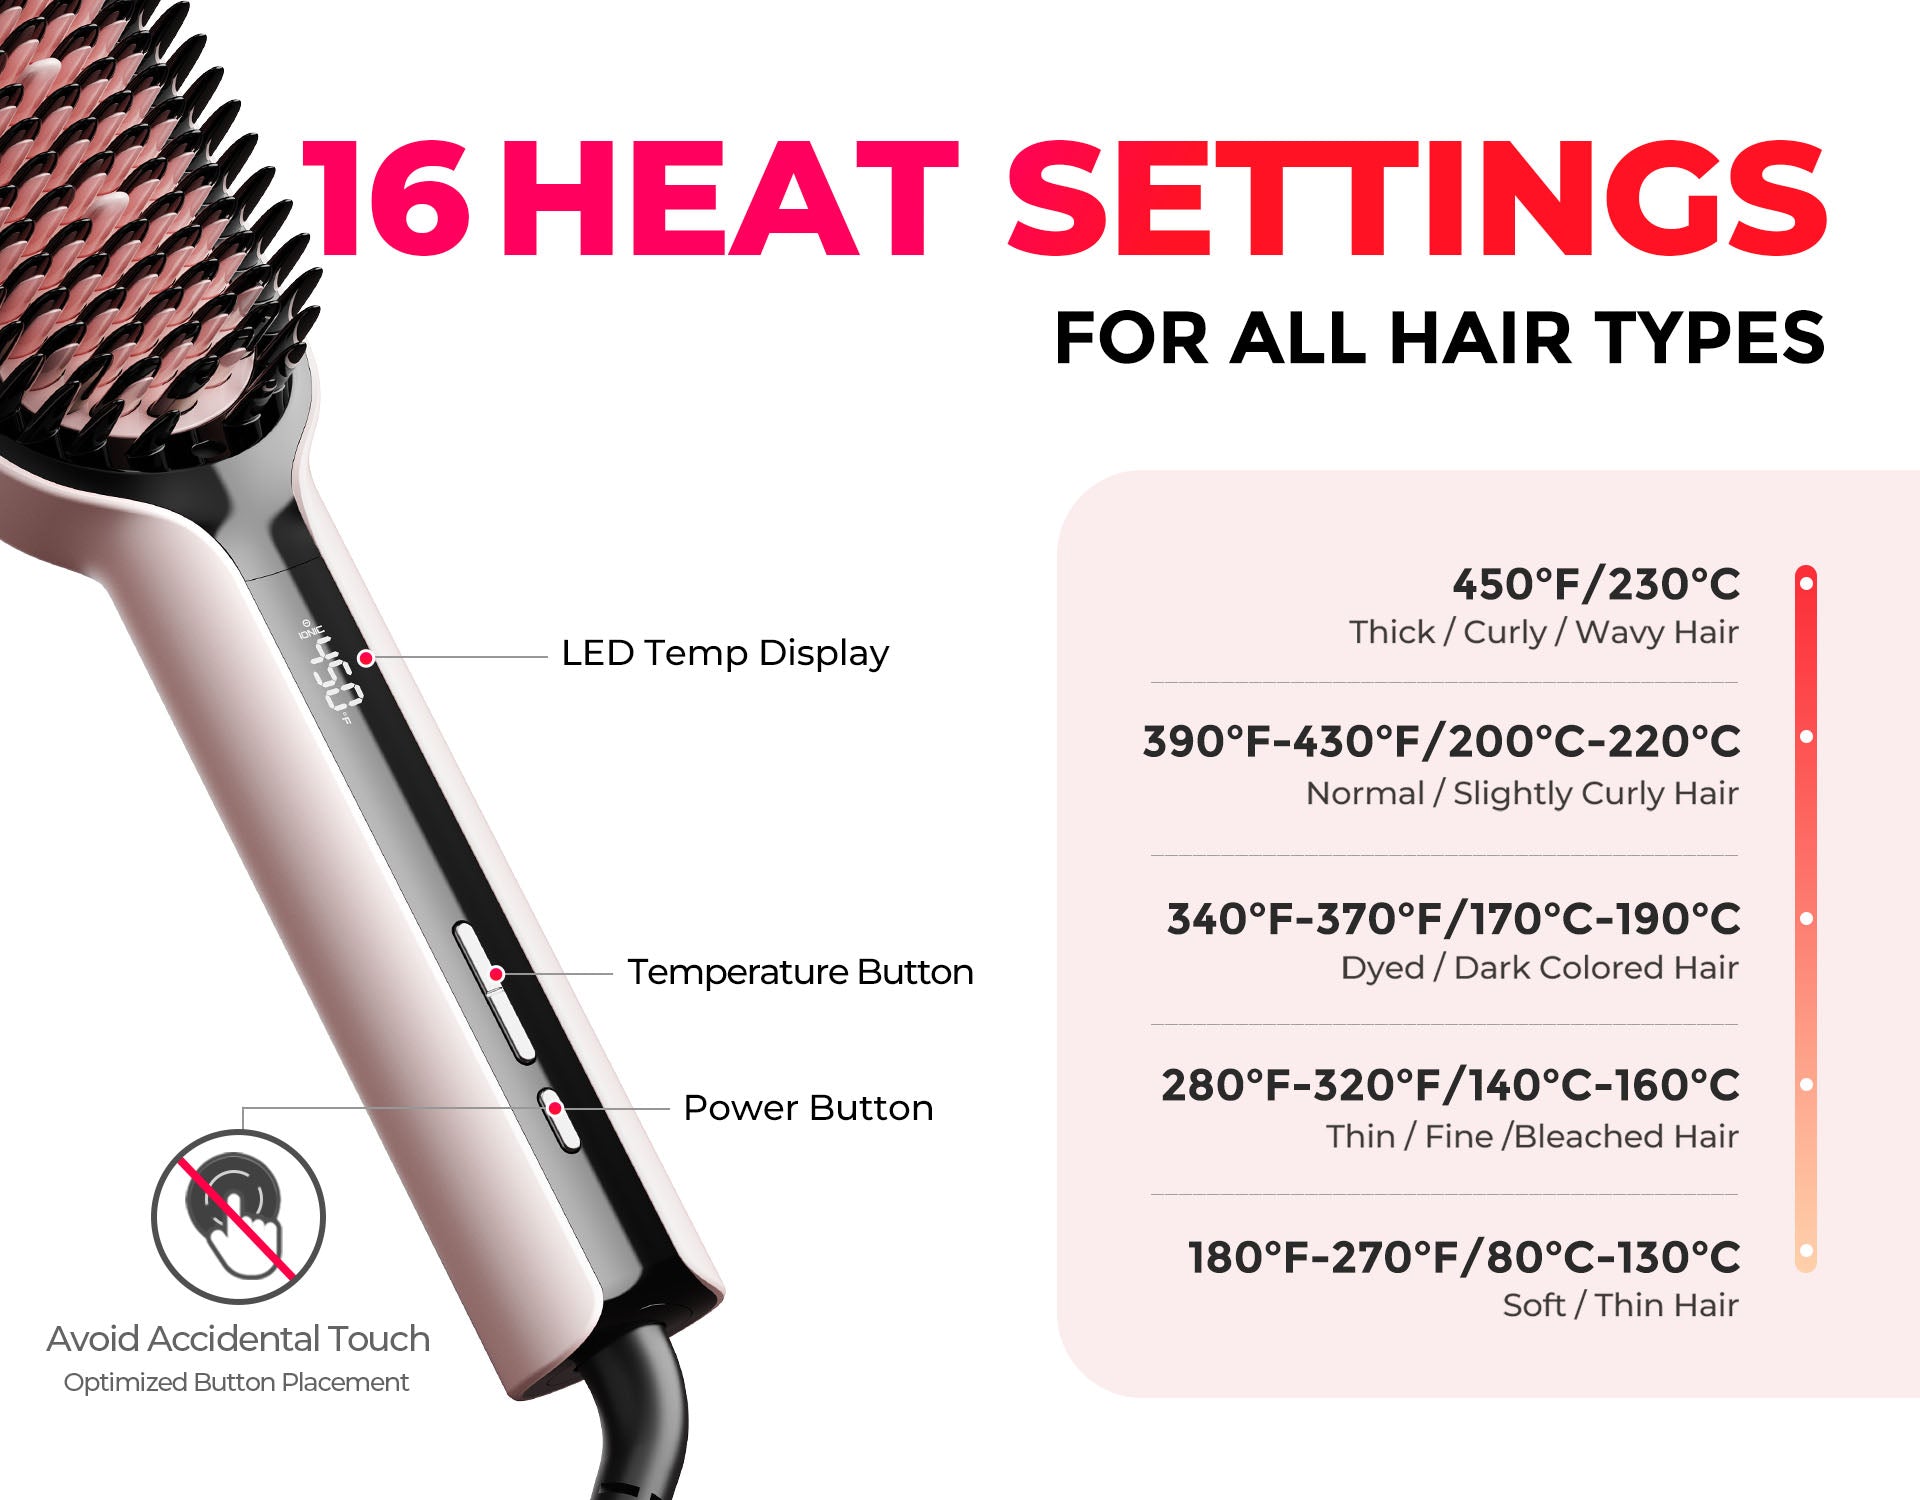 16 Heat Settings for all Hair Types